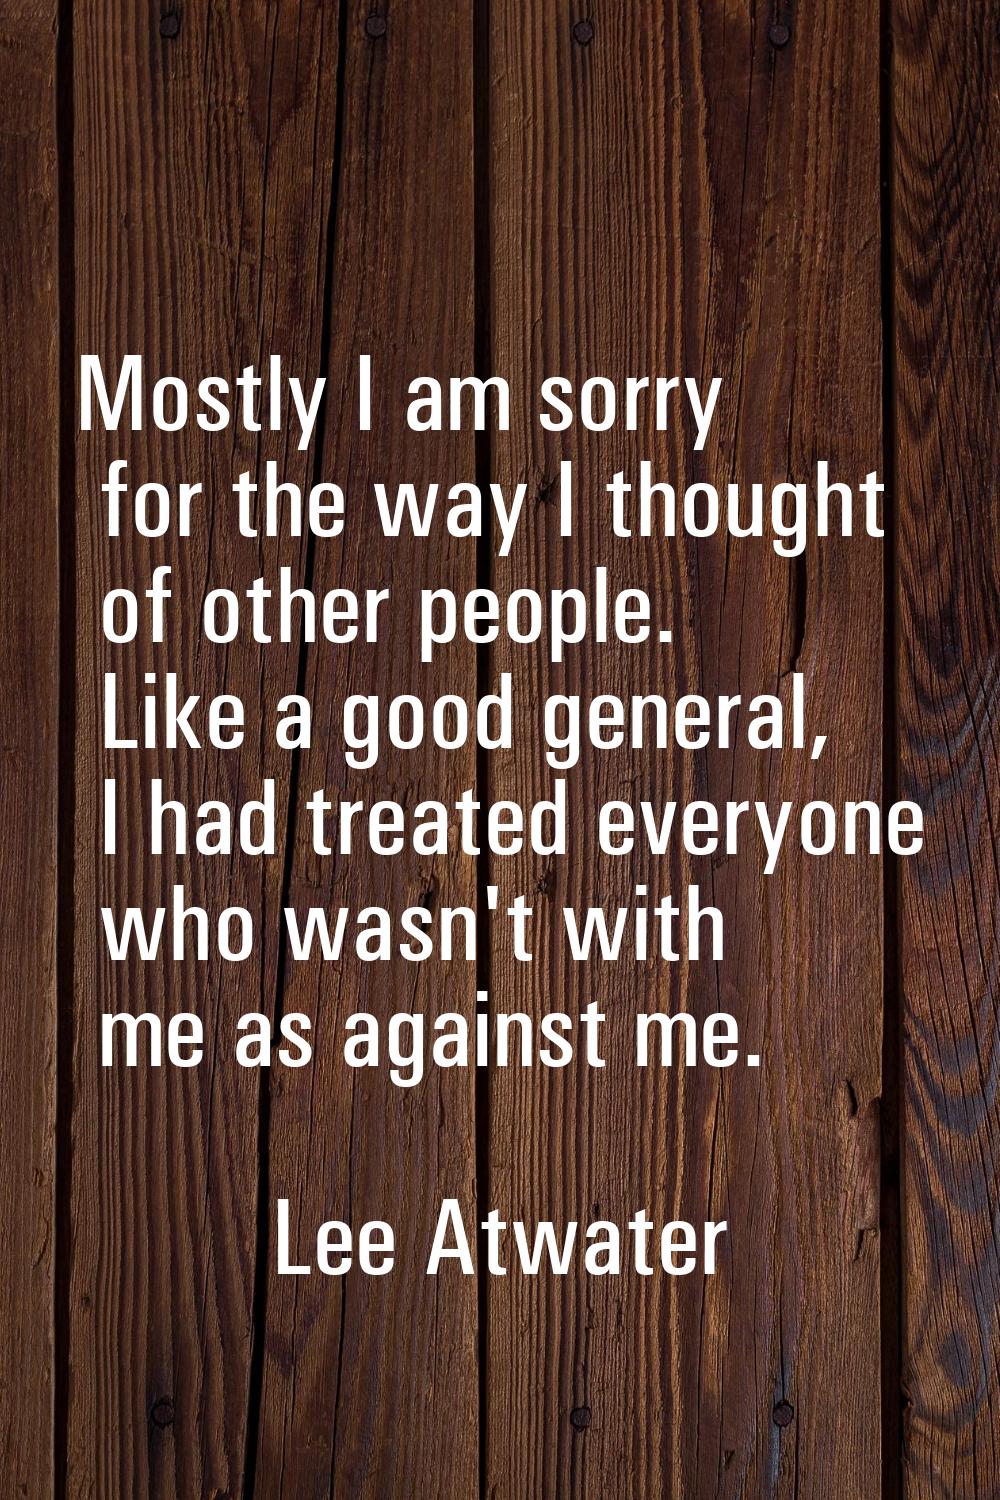 Mostly I am sorry for the way I thought of other people. Like a good general, I had treated everyon